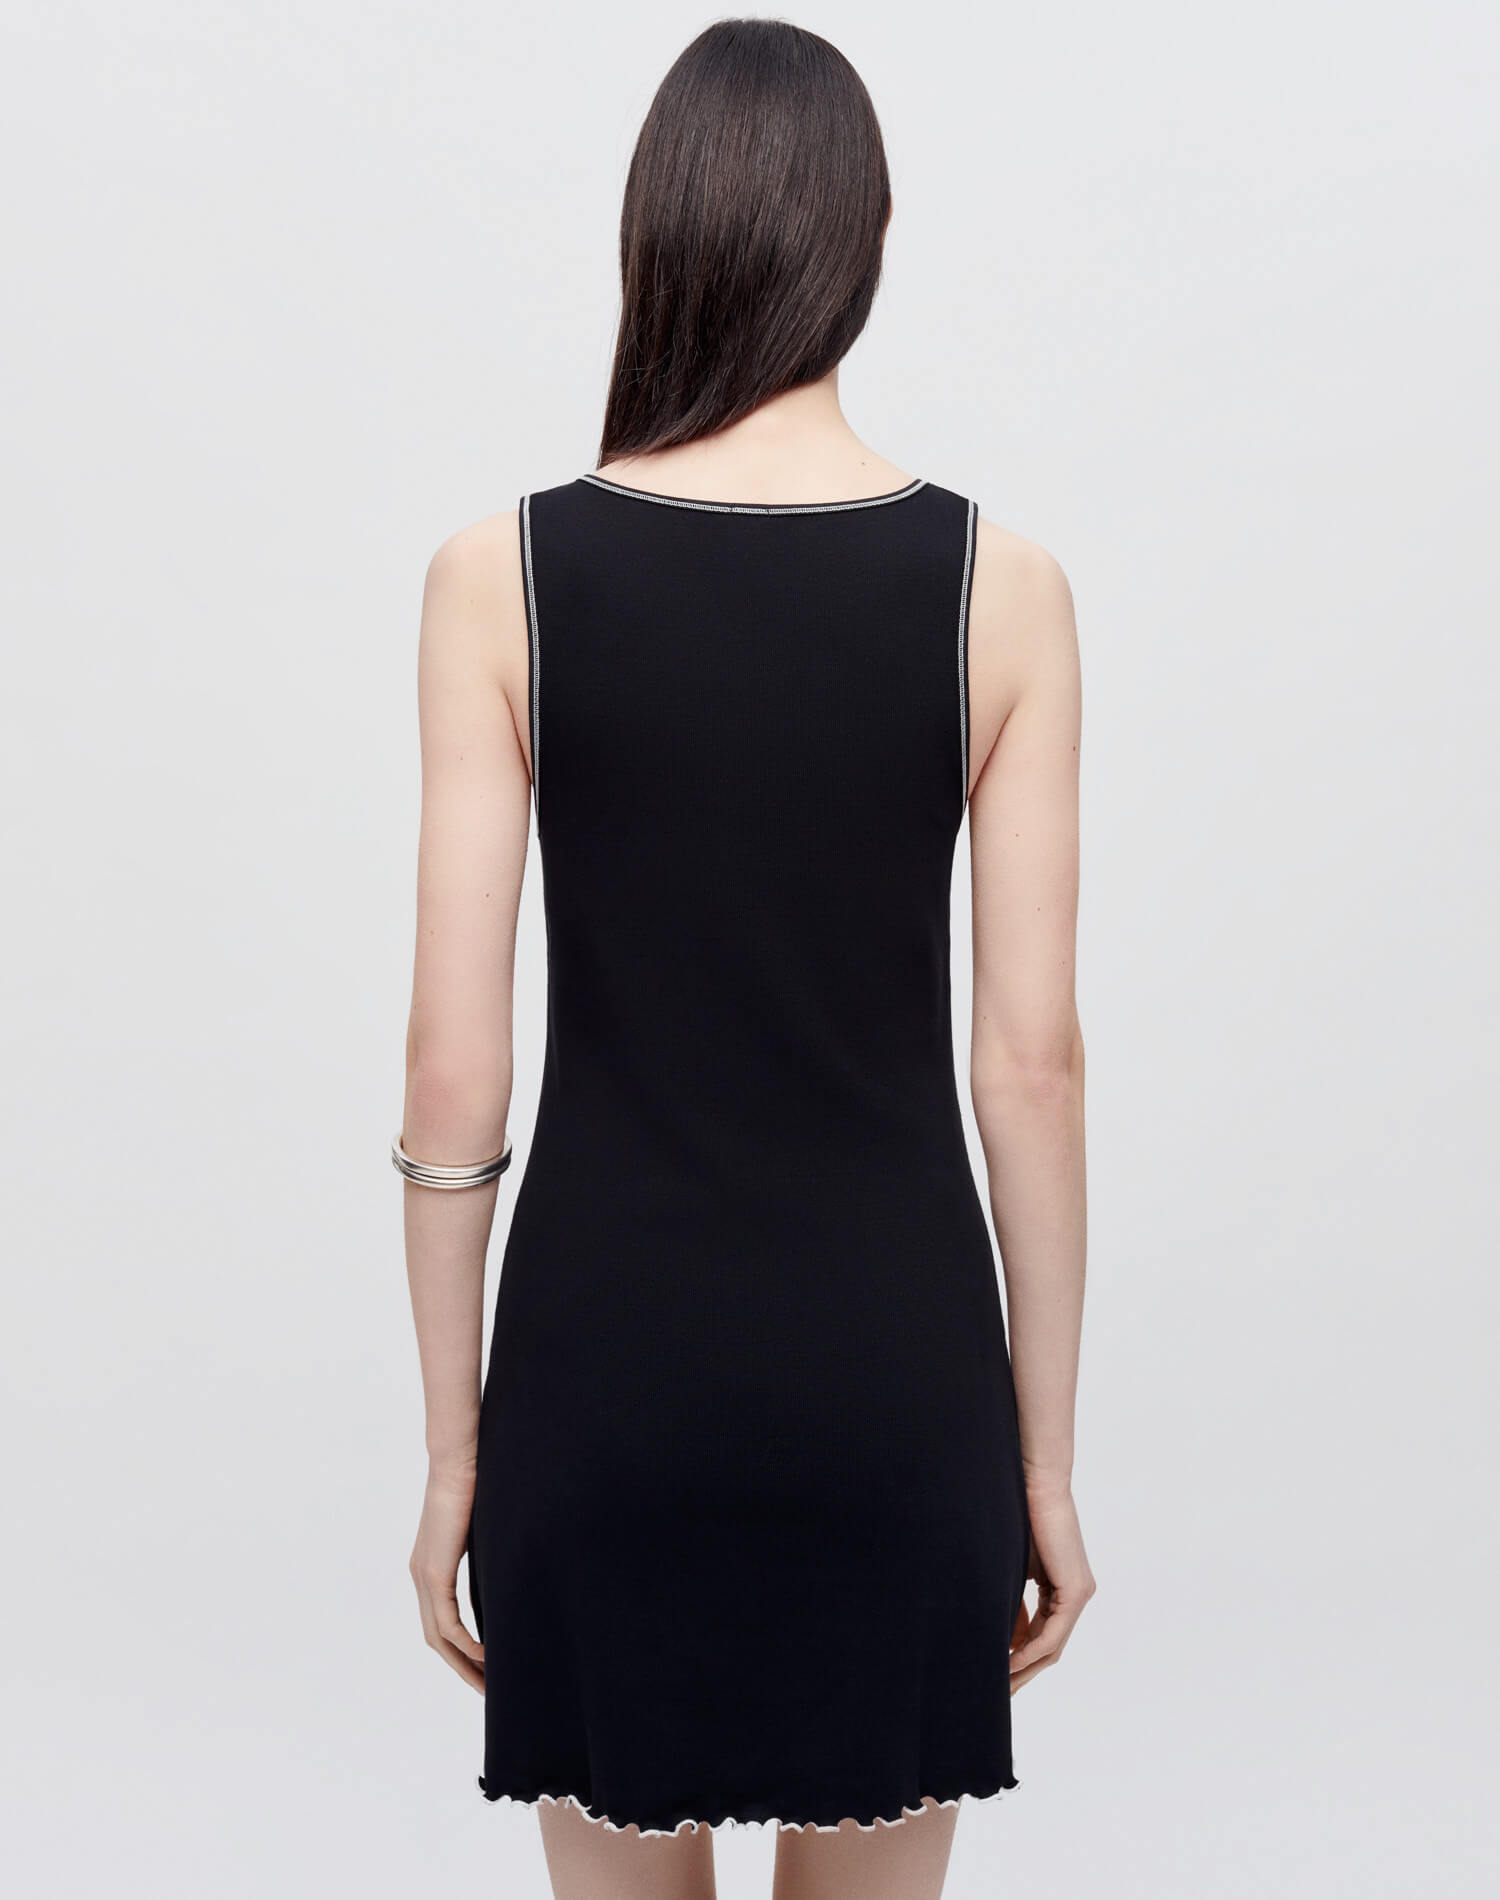 Sporty Contrast Dress - Black With White